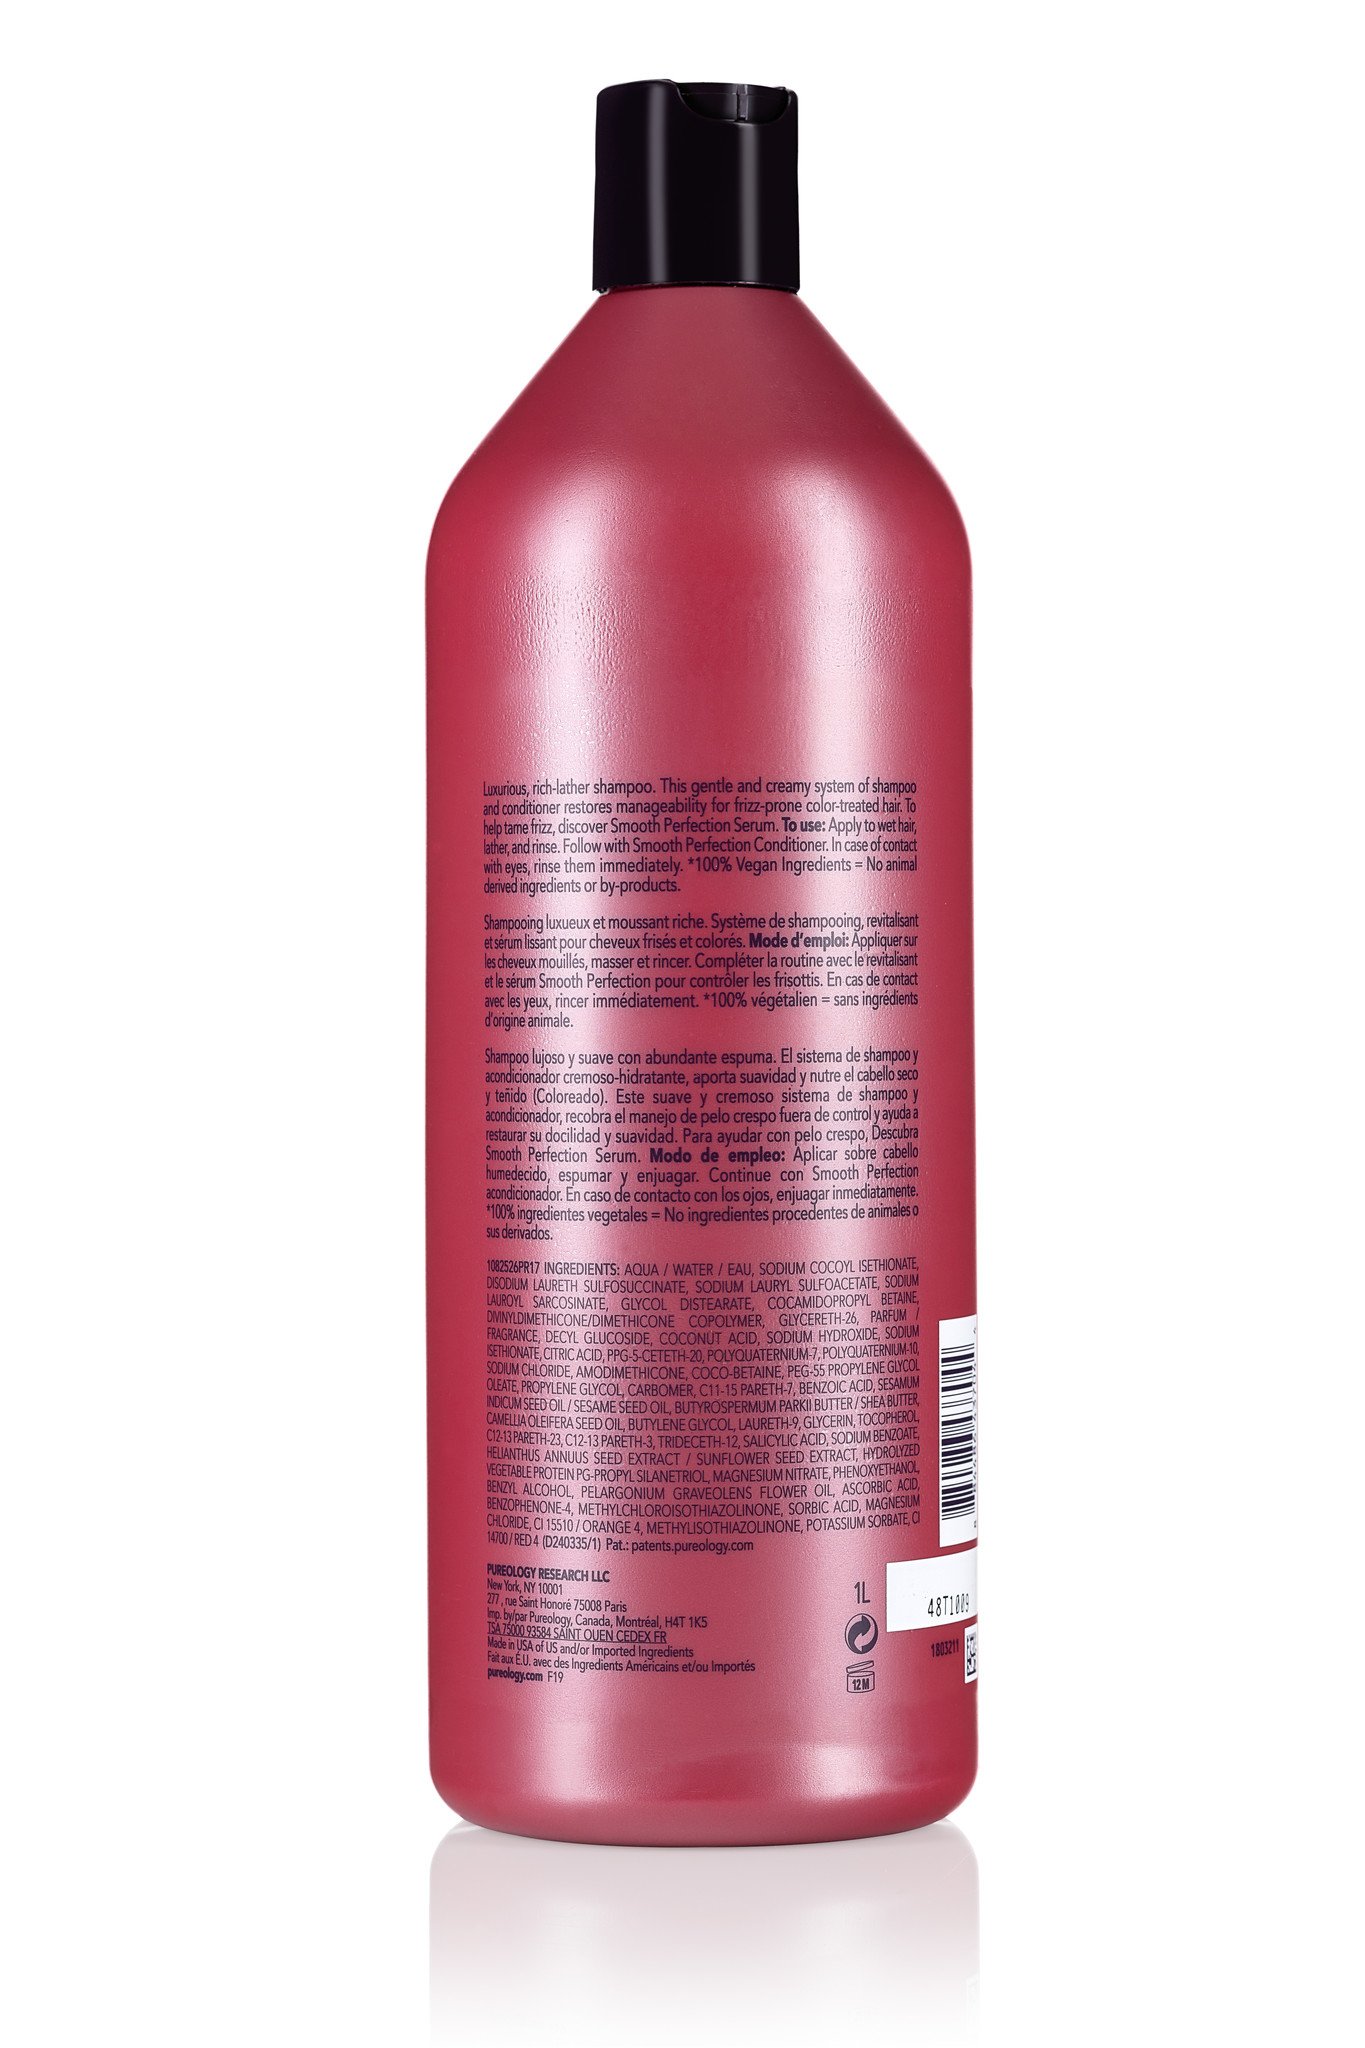 Pureology Smooth Perfection Conditioner 266ml - Hair products New